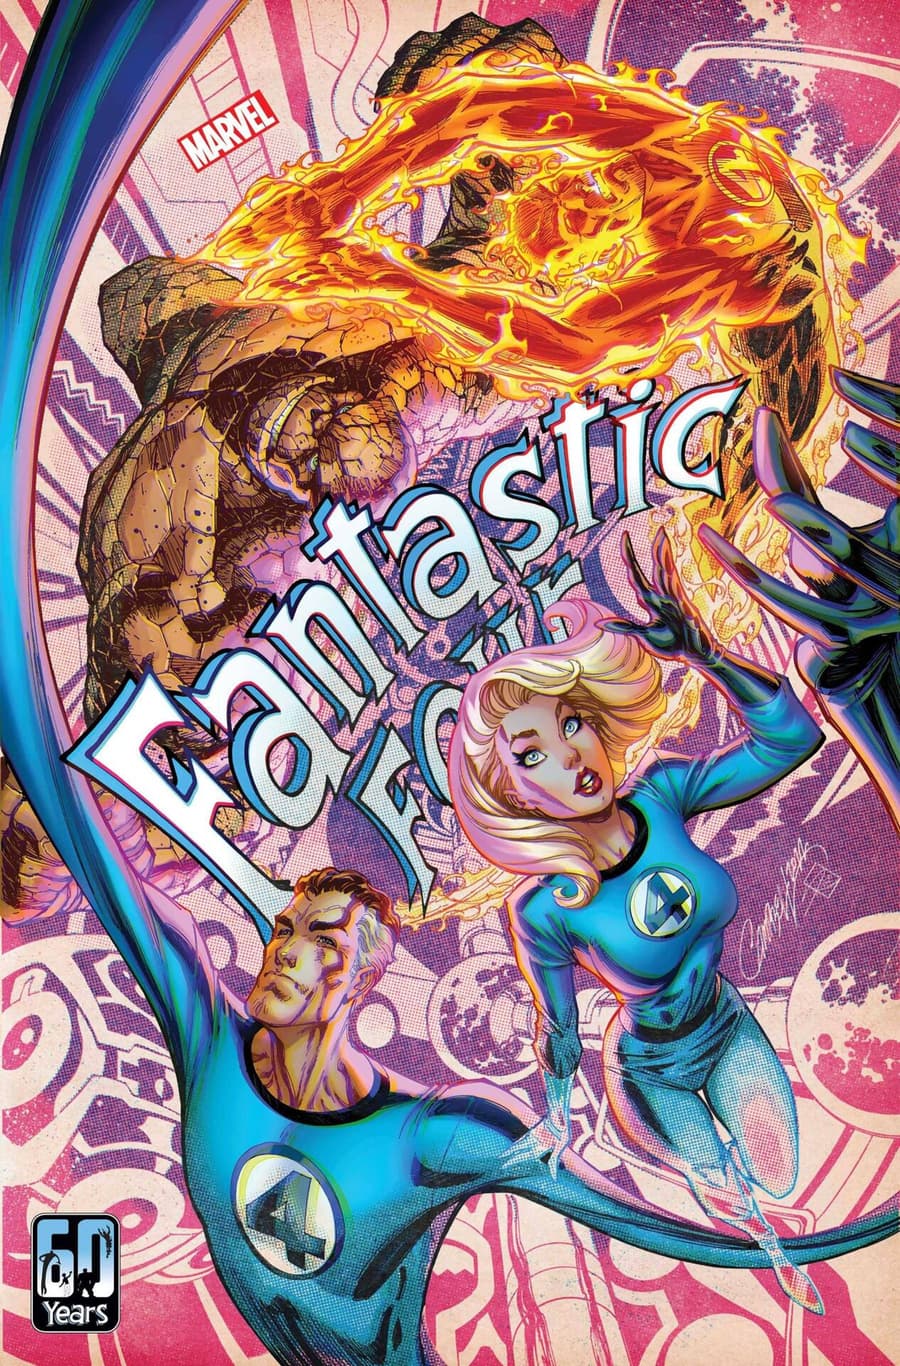 FANTASTIC FOUR #1 Anniversary Variant Cover by J. Scott Campbell